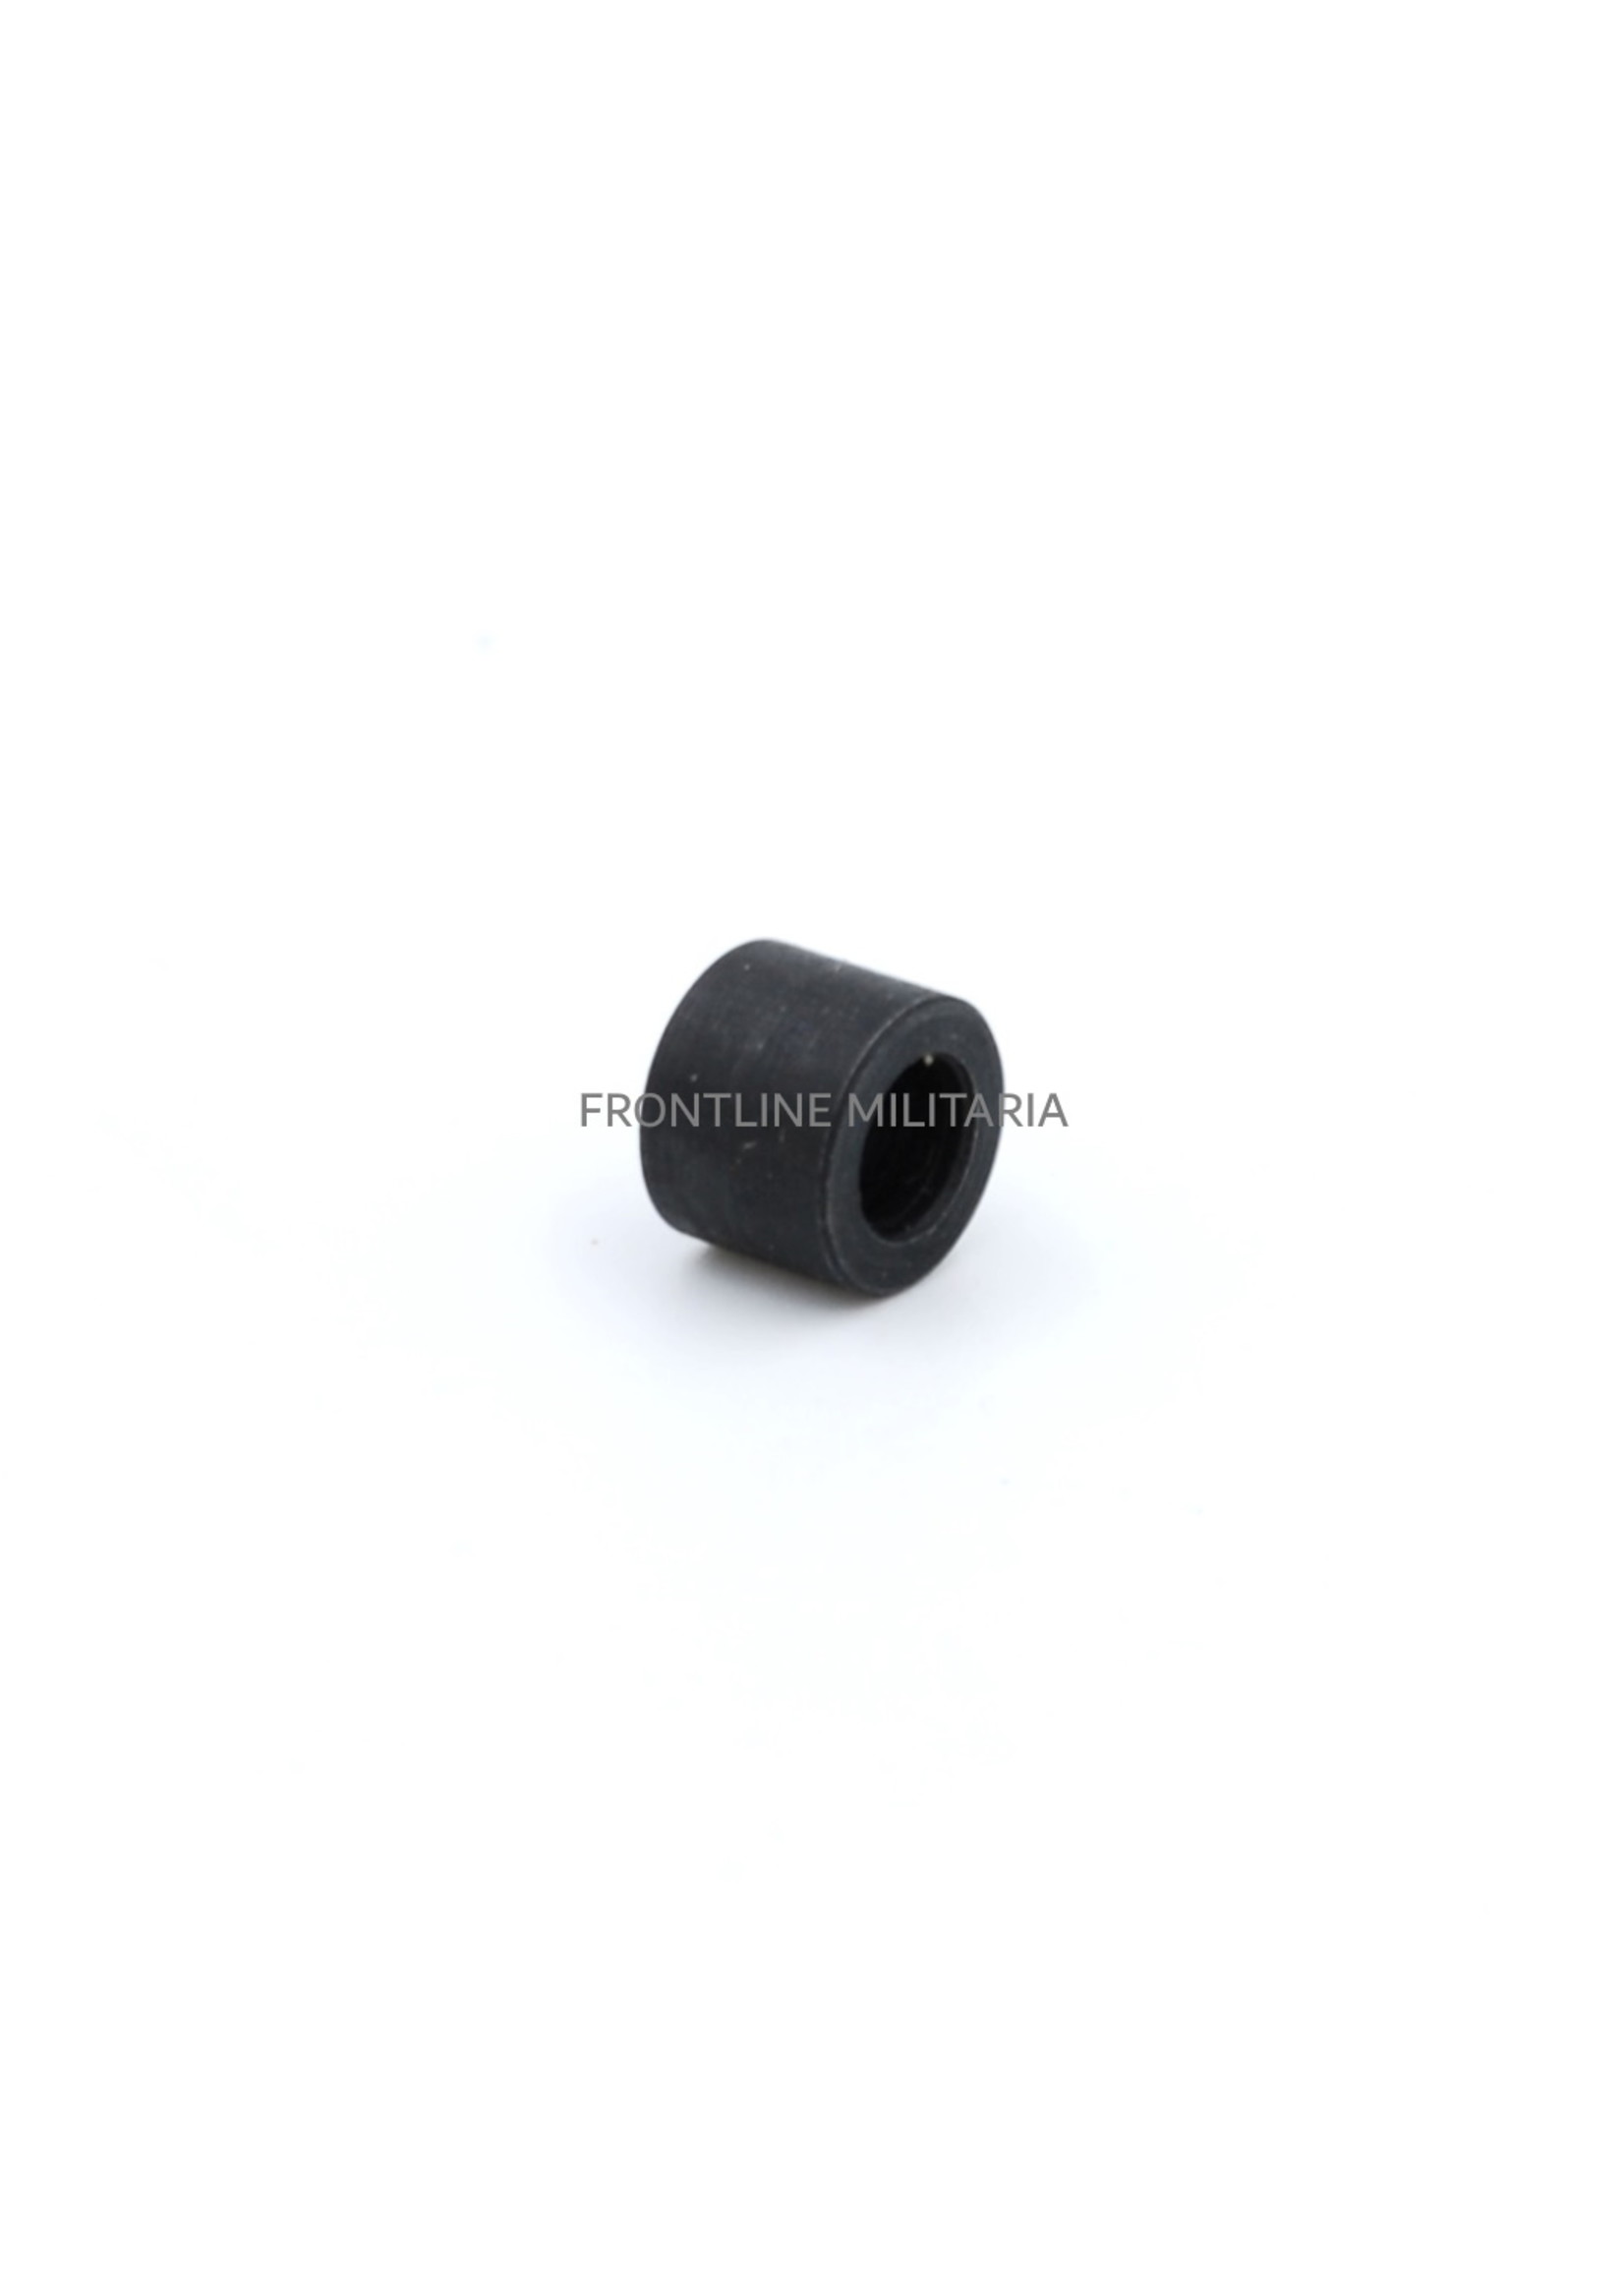 Sear & Trigger spacers for the G43 and K43 Rifle